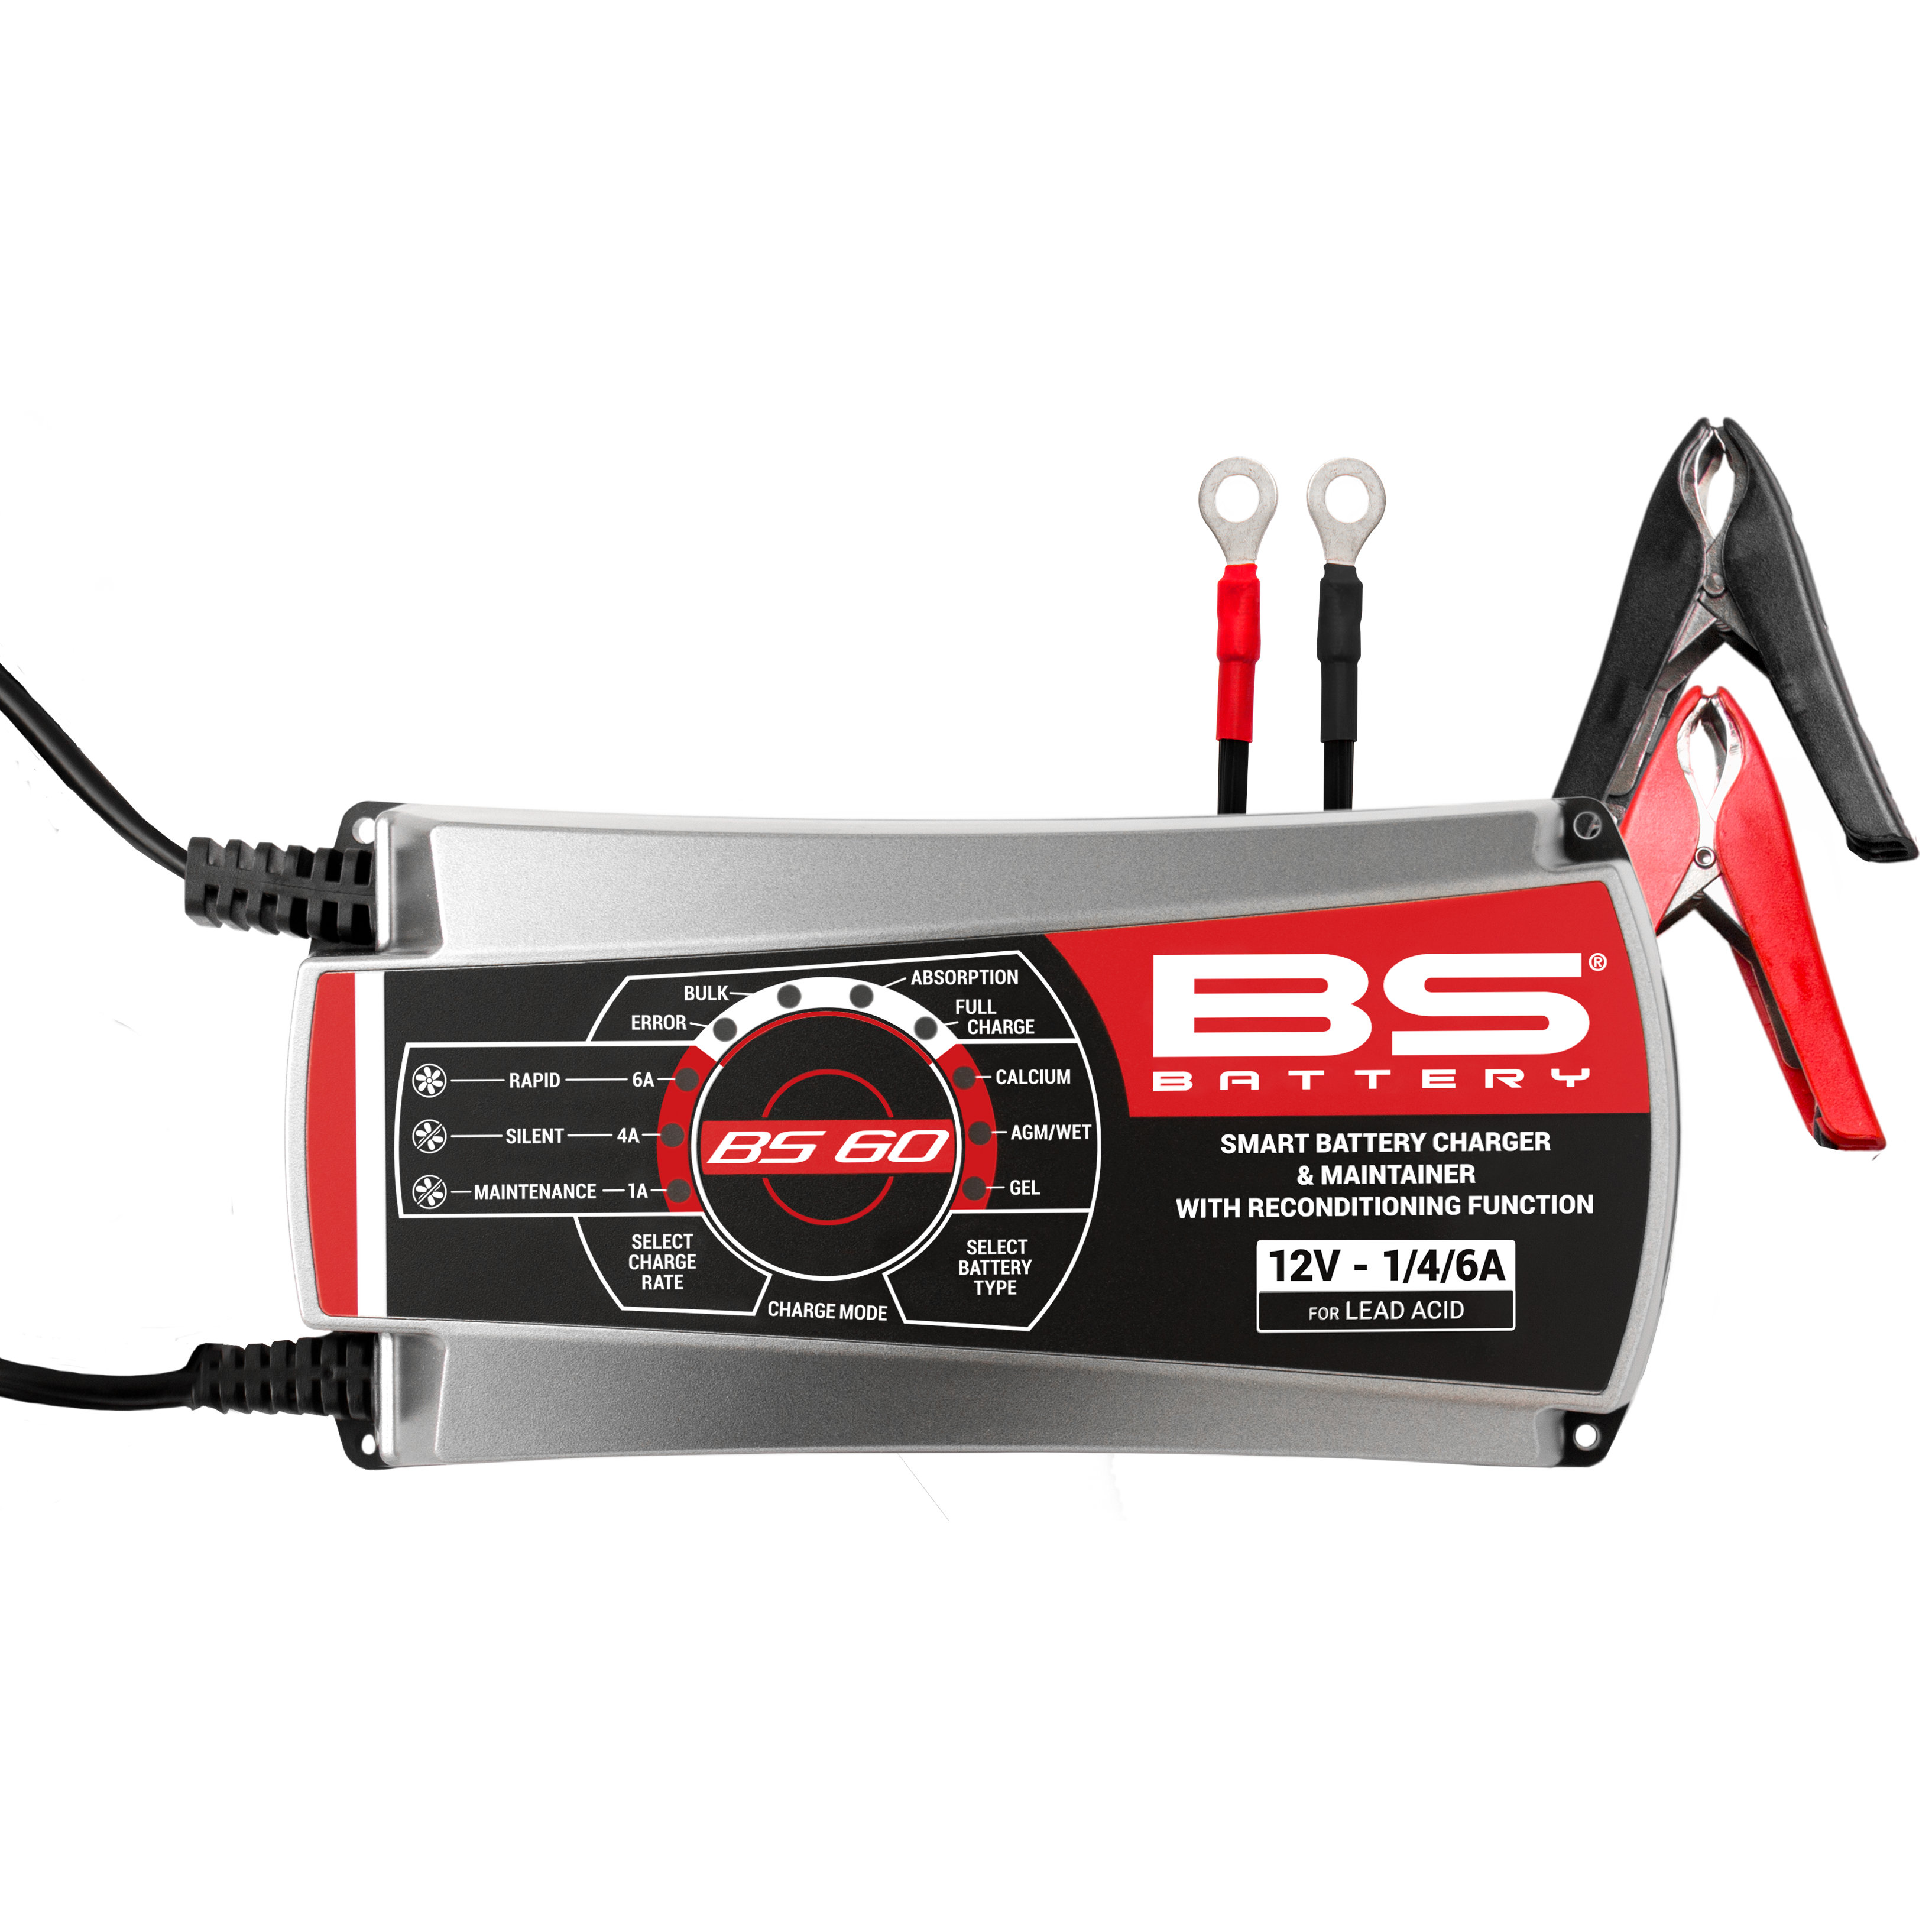 BS 60 - BS BATTERY